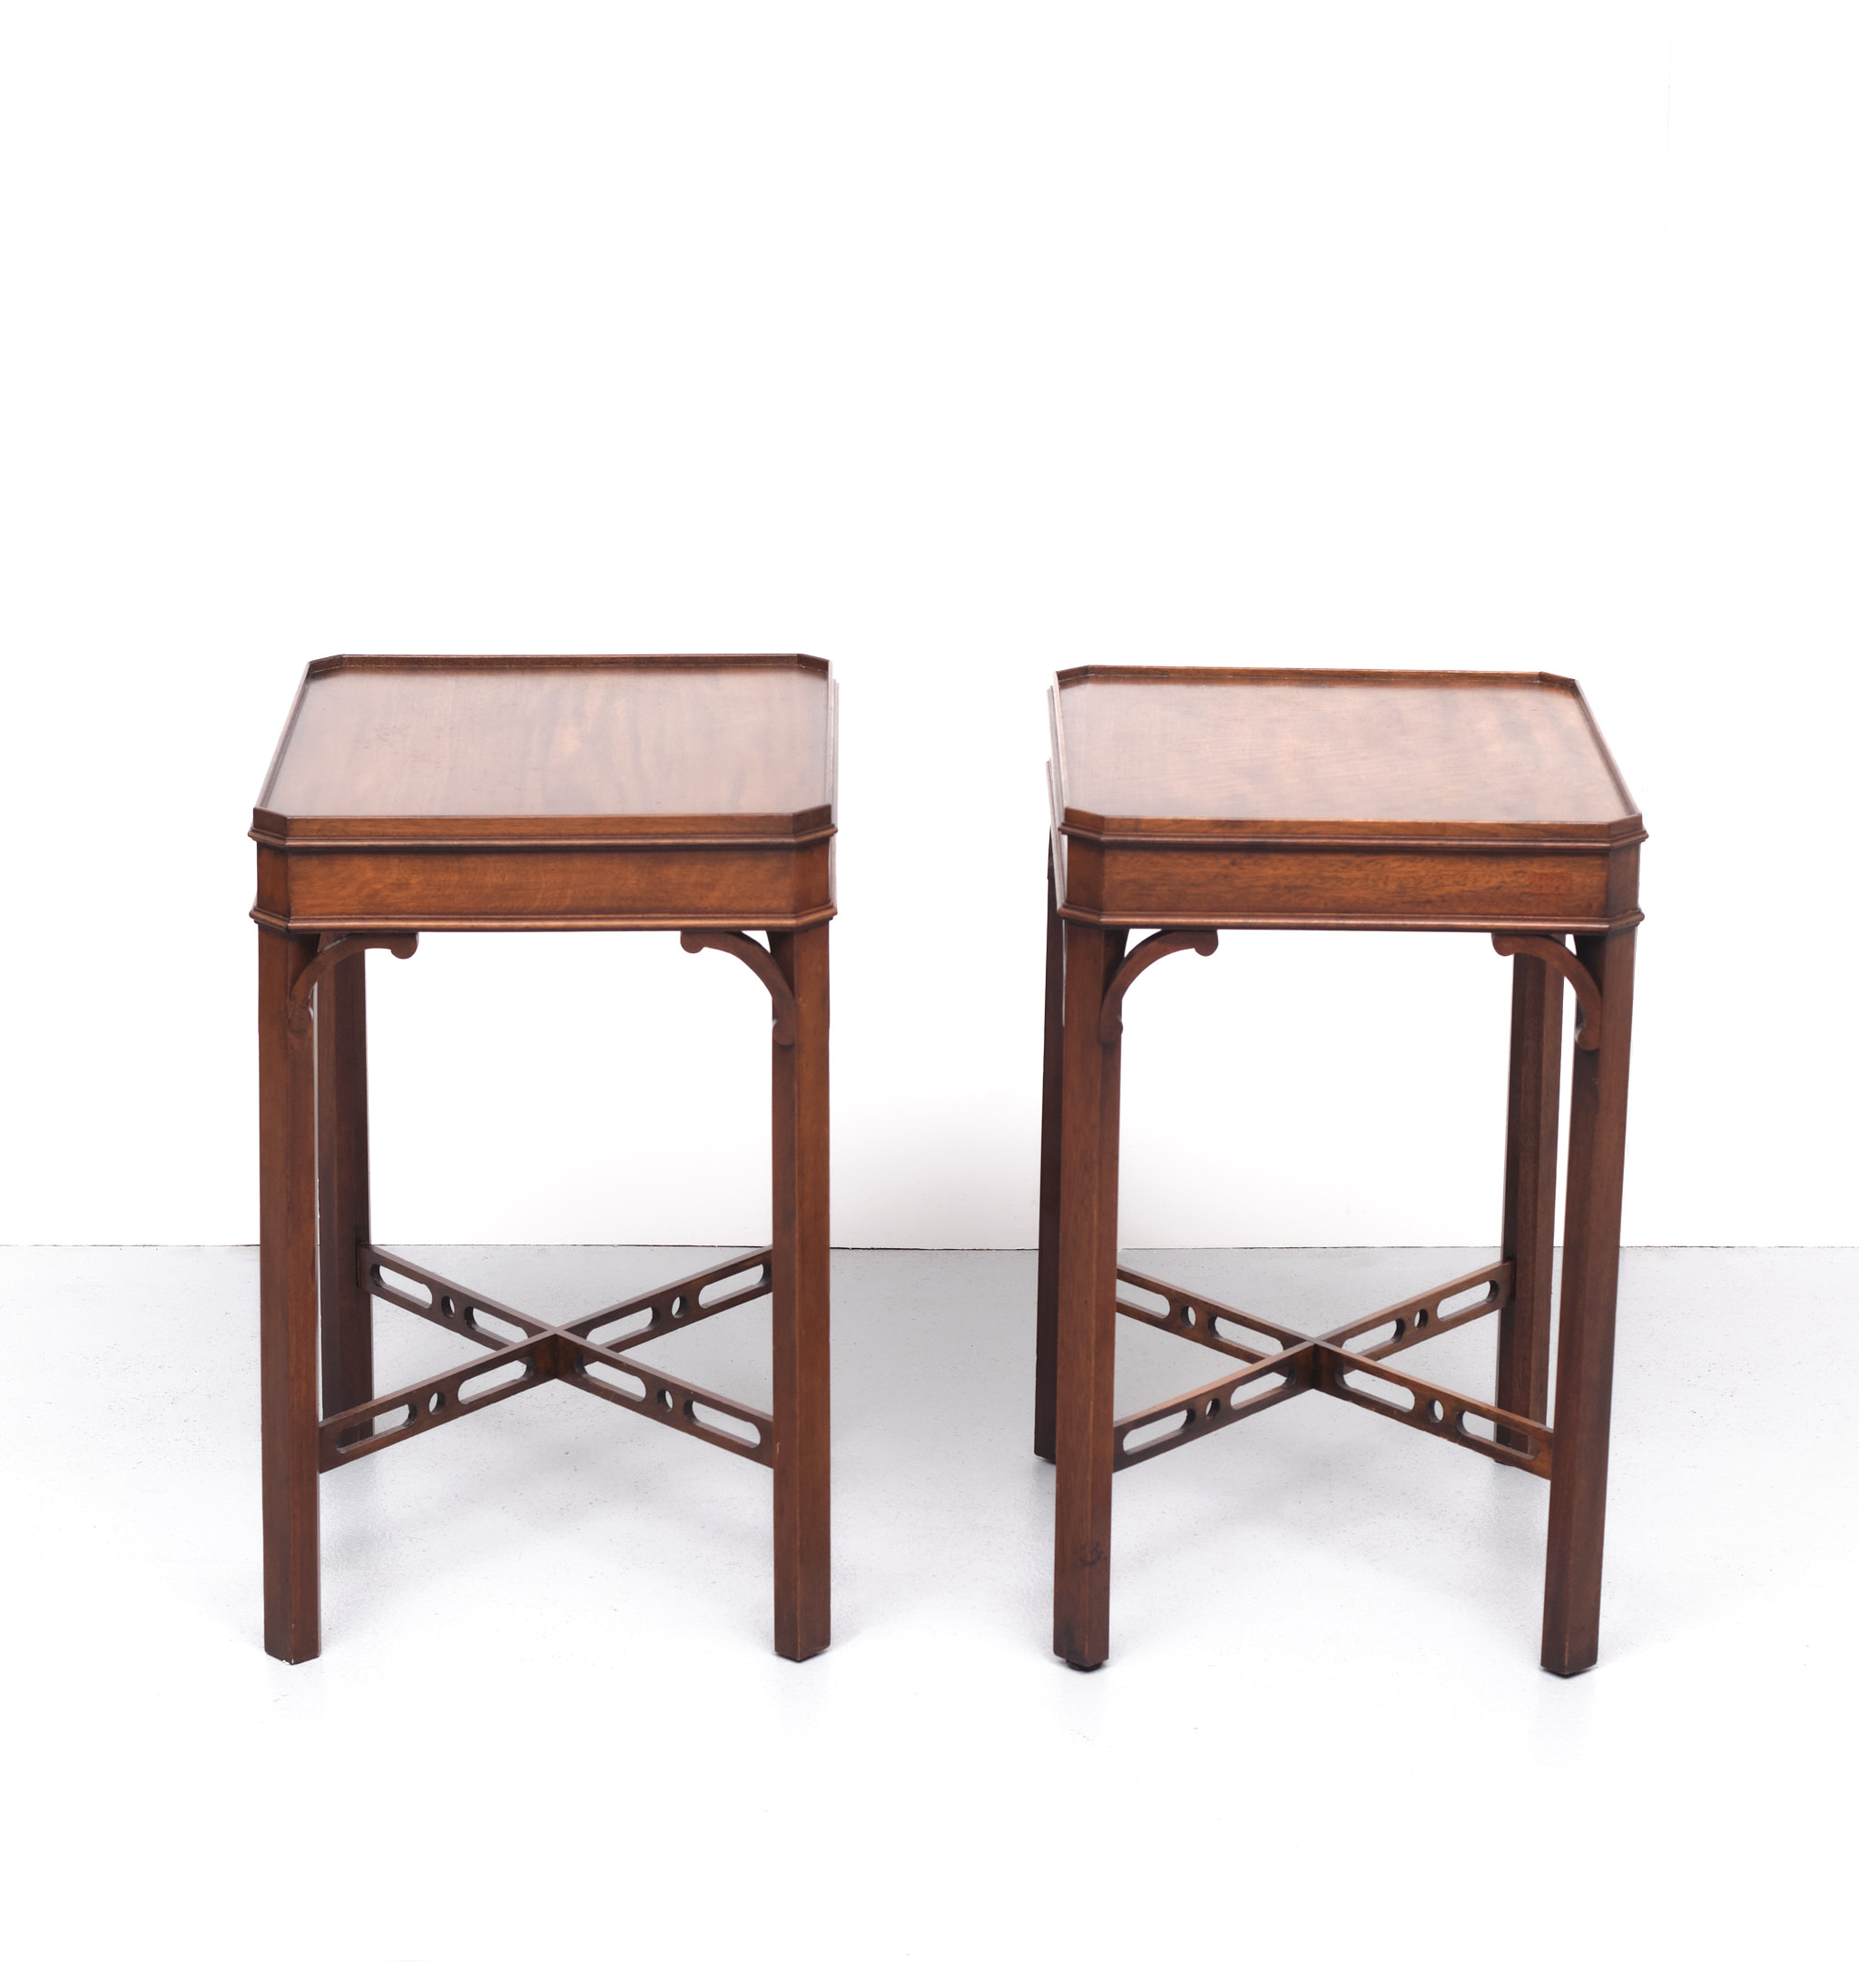 Bevan Funnell Mahogany side tables for Reprodux England 1960s